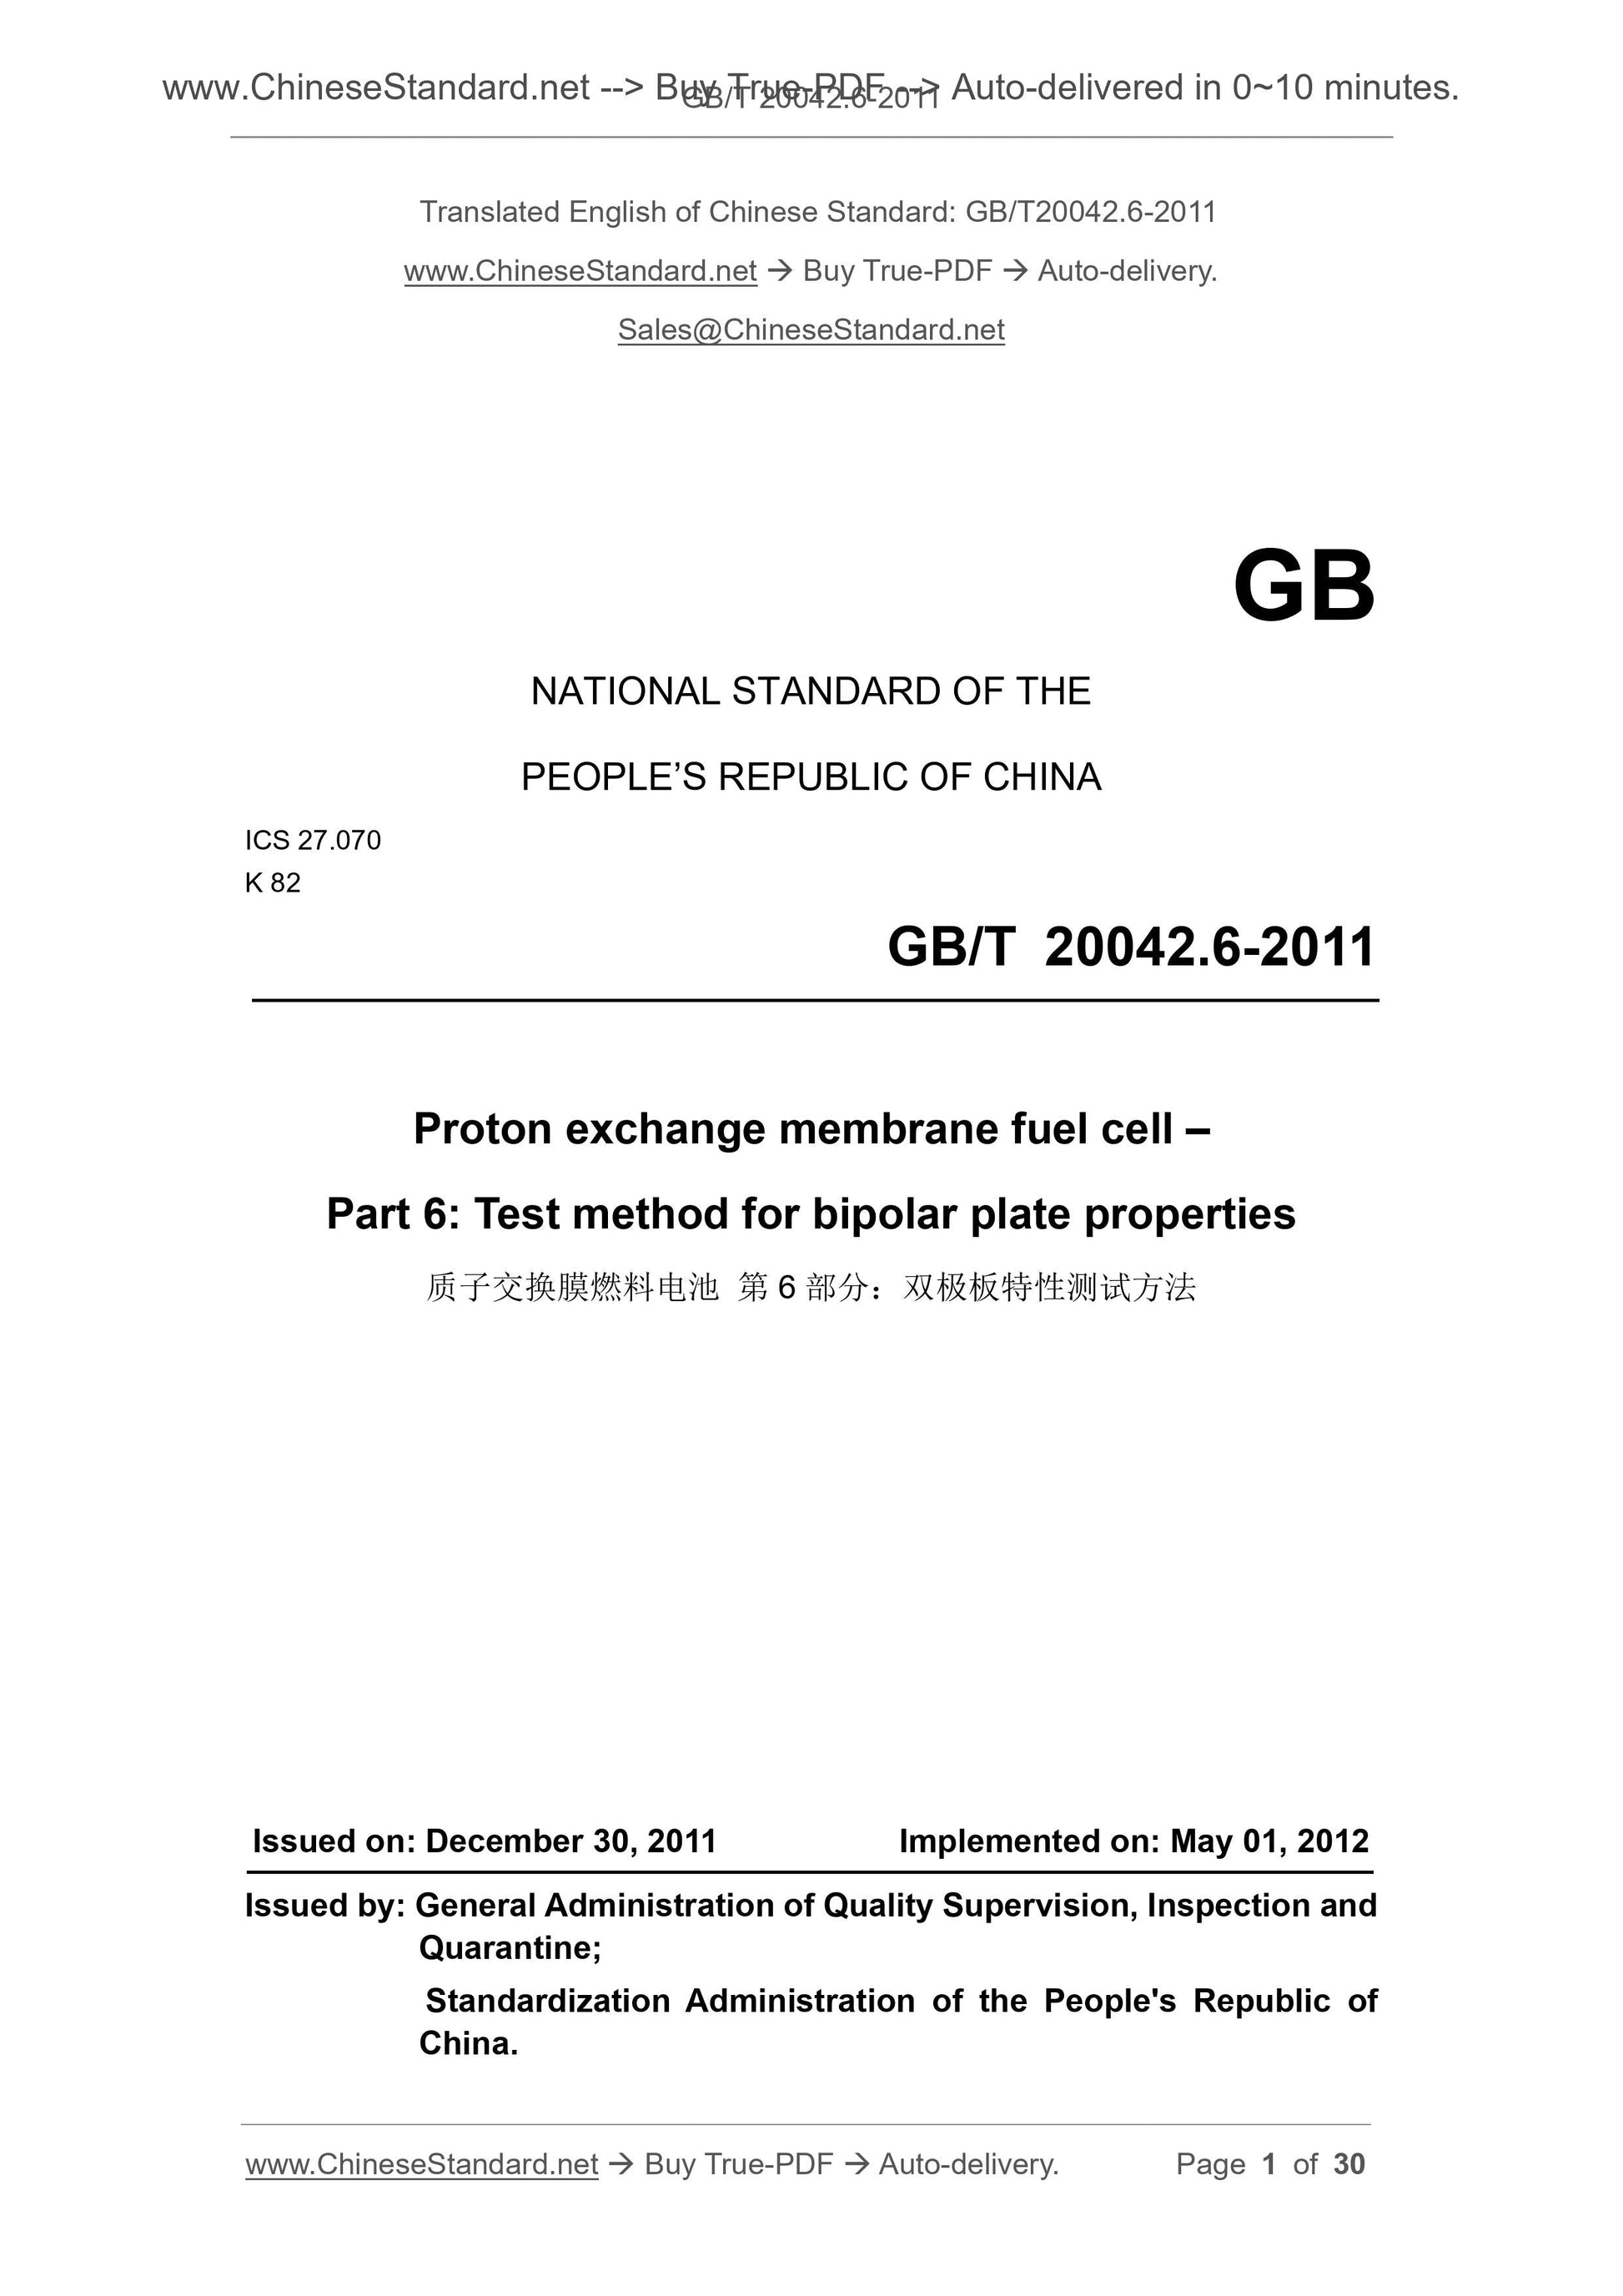 GB/T 20042.6-2011 Page 1